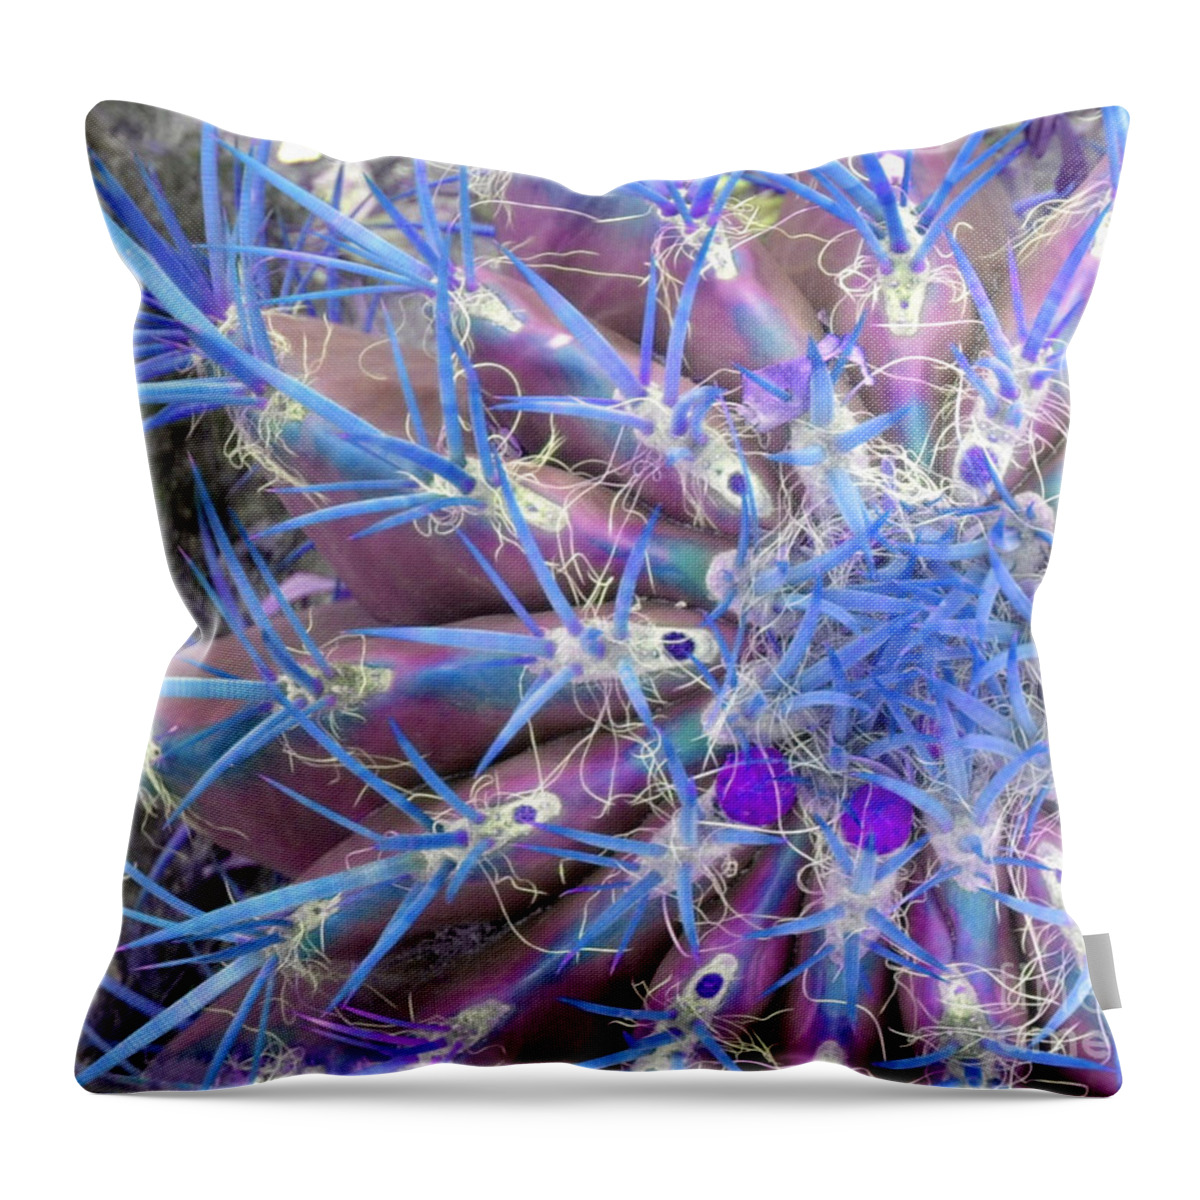 Blue Throw Pillow featuring the photograph Blue Cactus by Rebecca Margraf